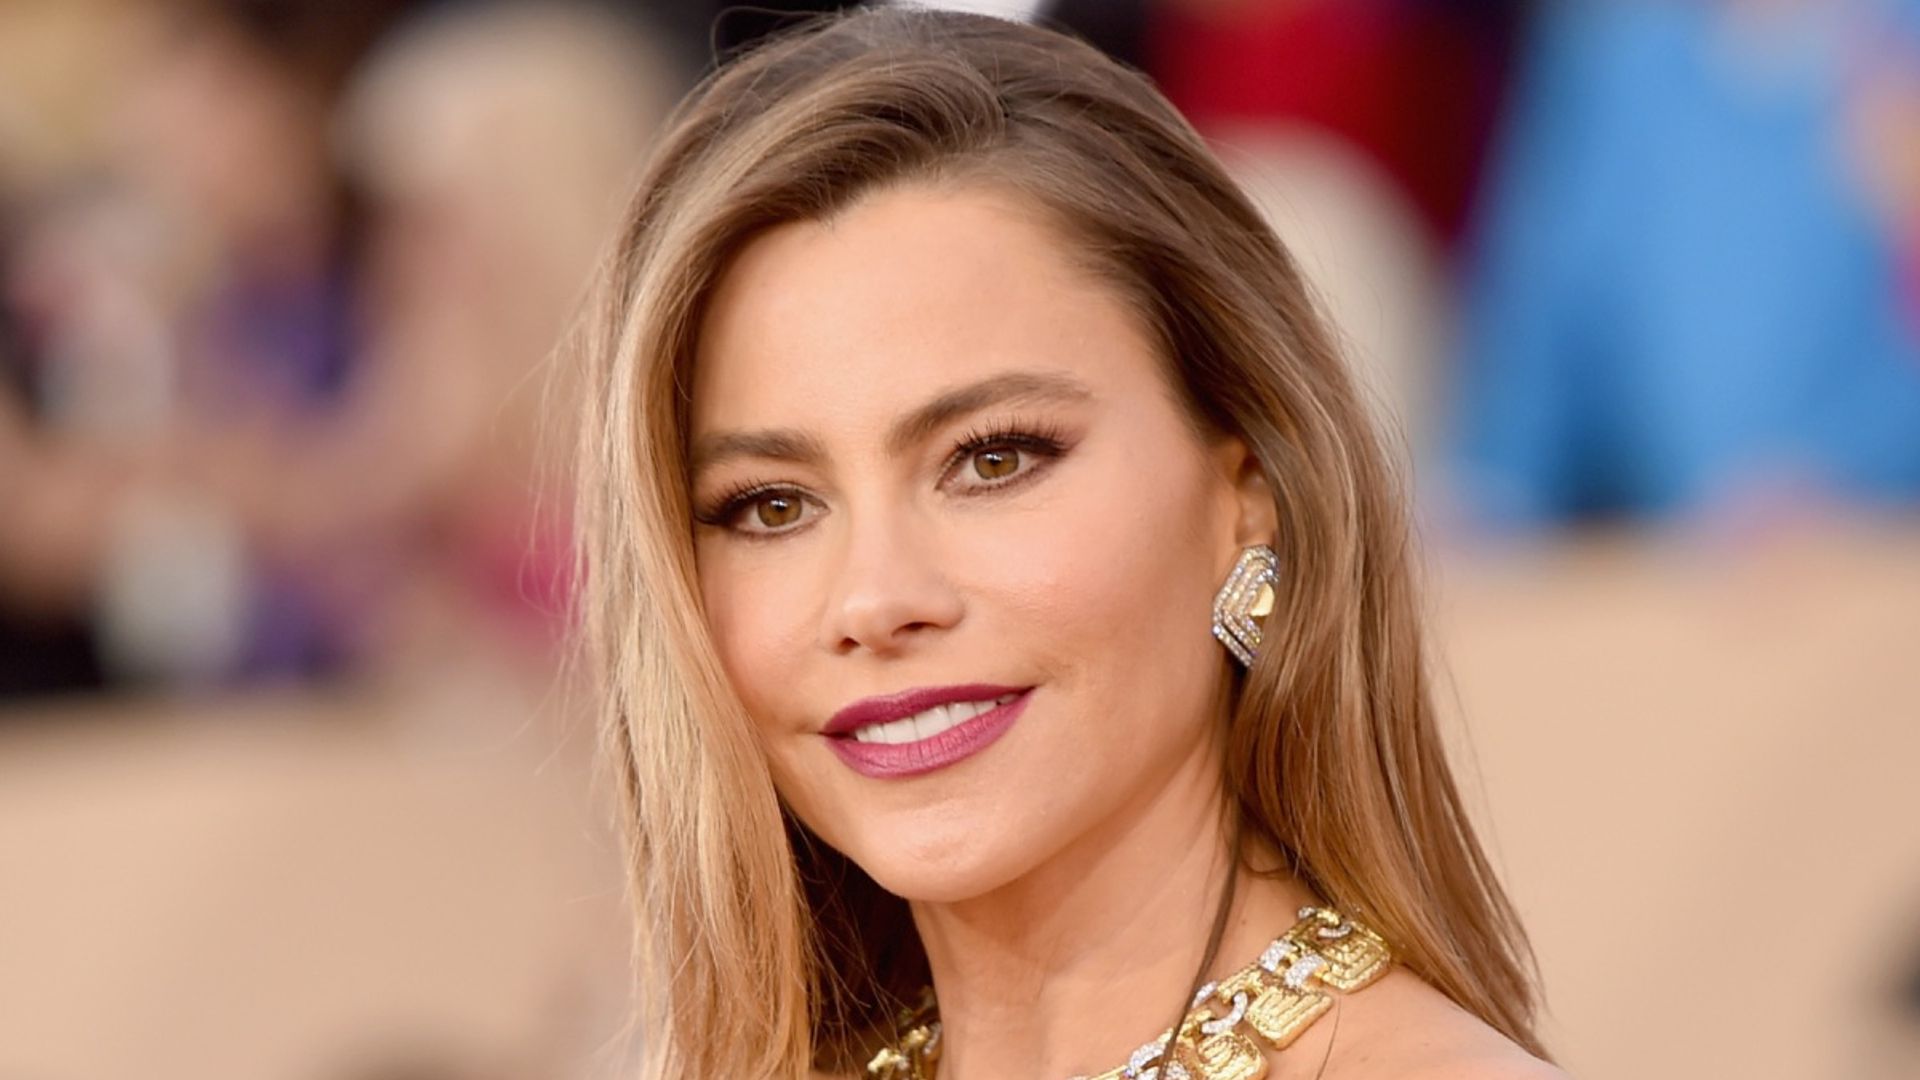 Sofia Vergara forgets her swimsuit during sun-soaked vacation - see photo